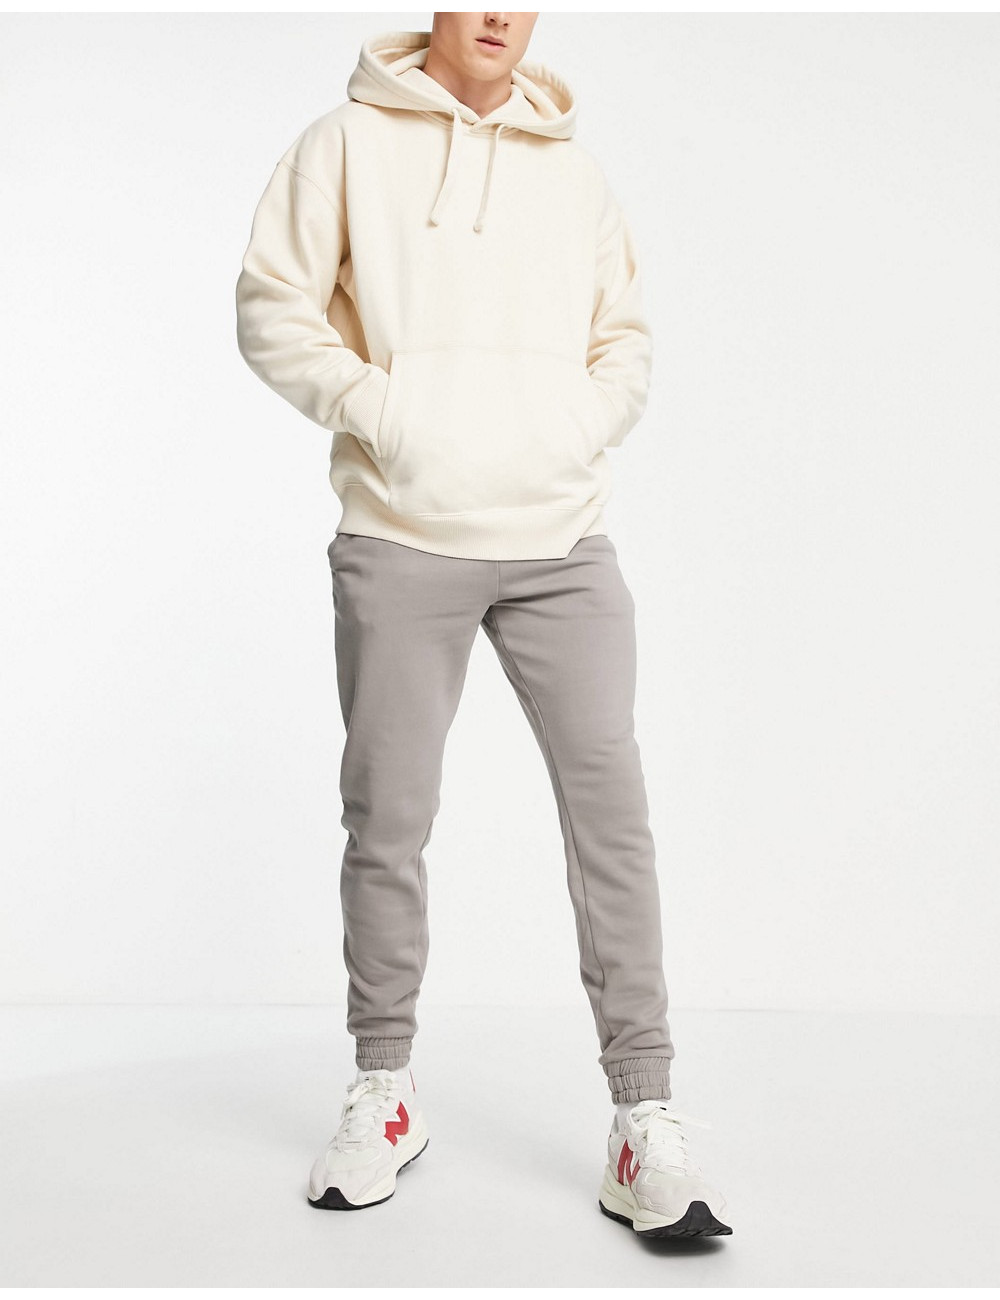 New Look jogger in light grey